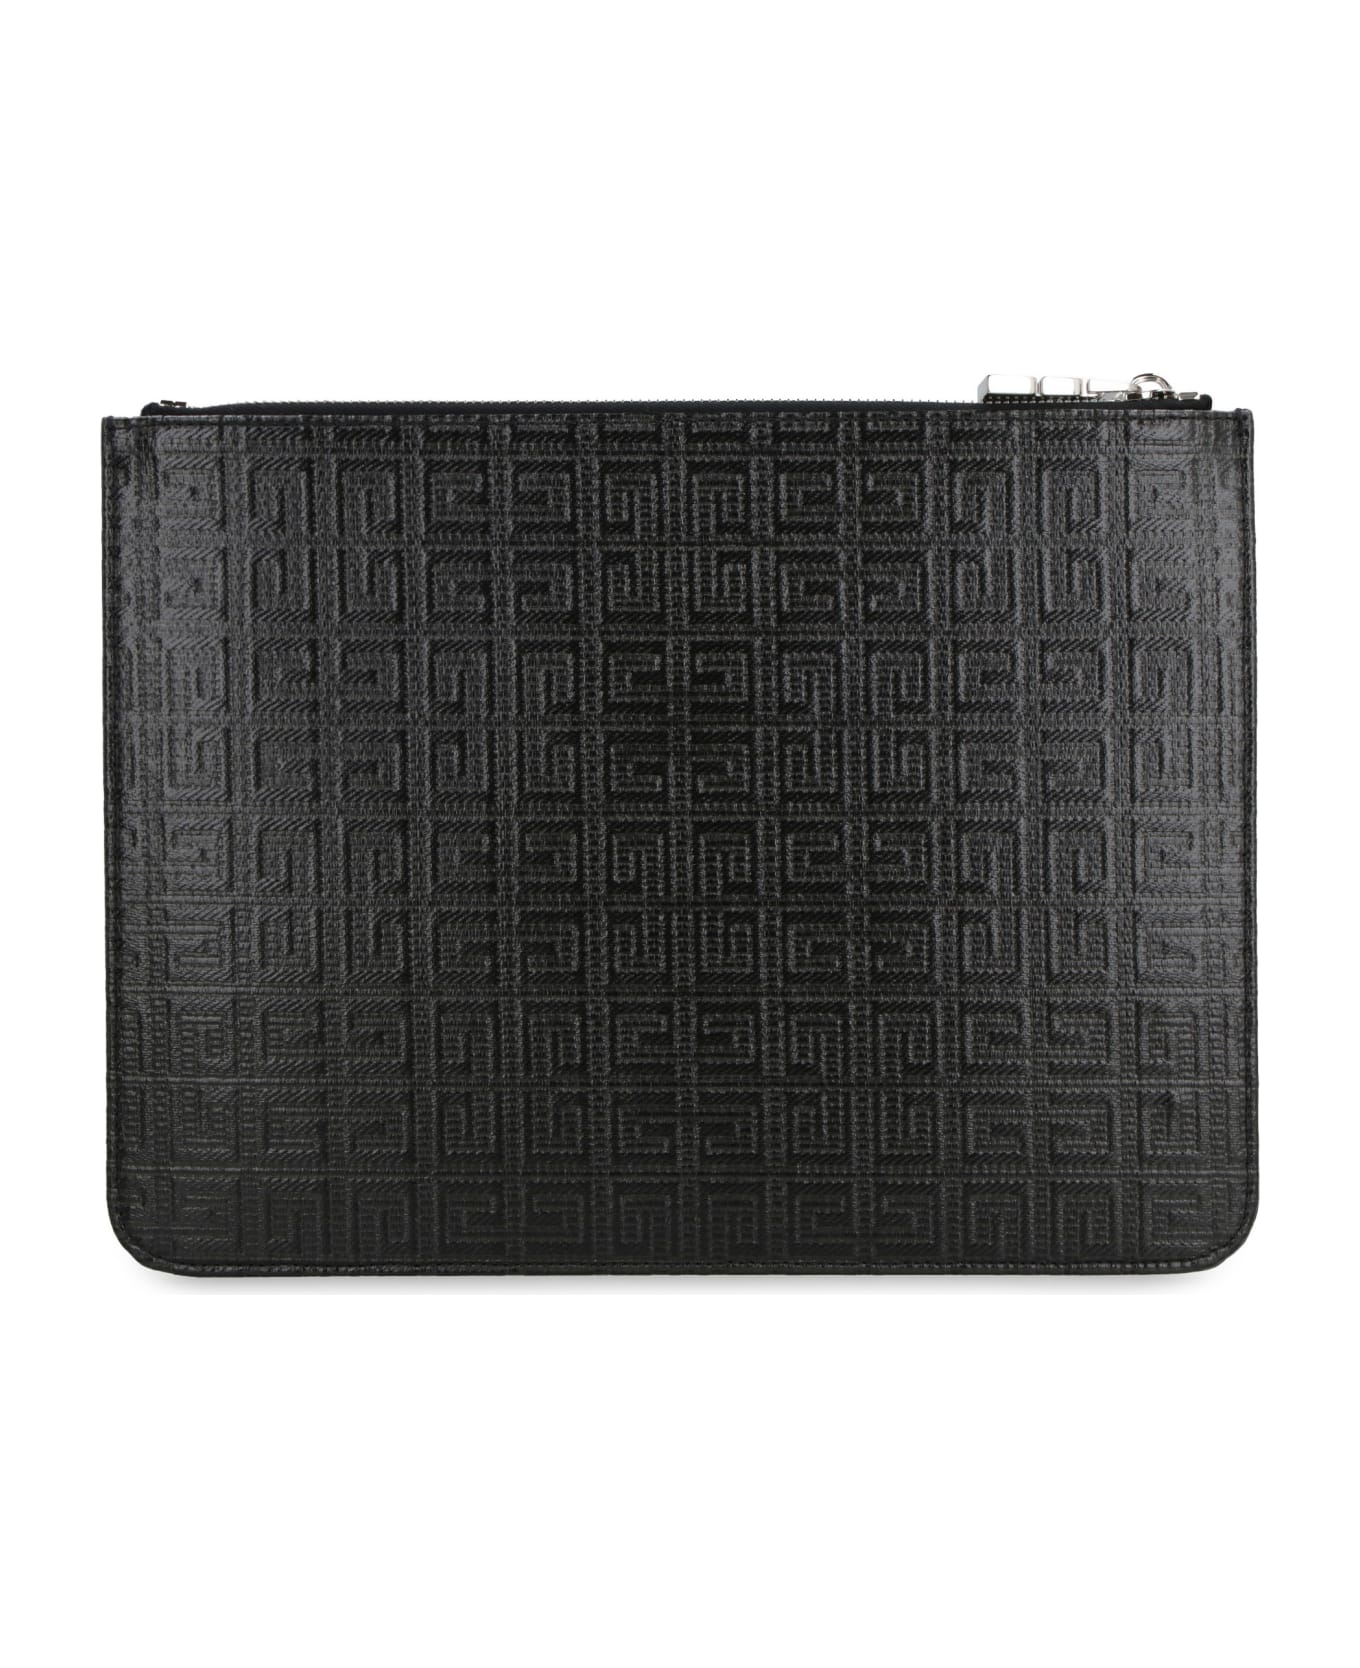 Givenchy 4g Coated Canvas Flat Pouch - black